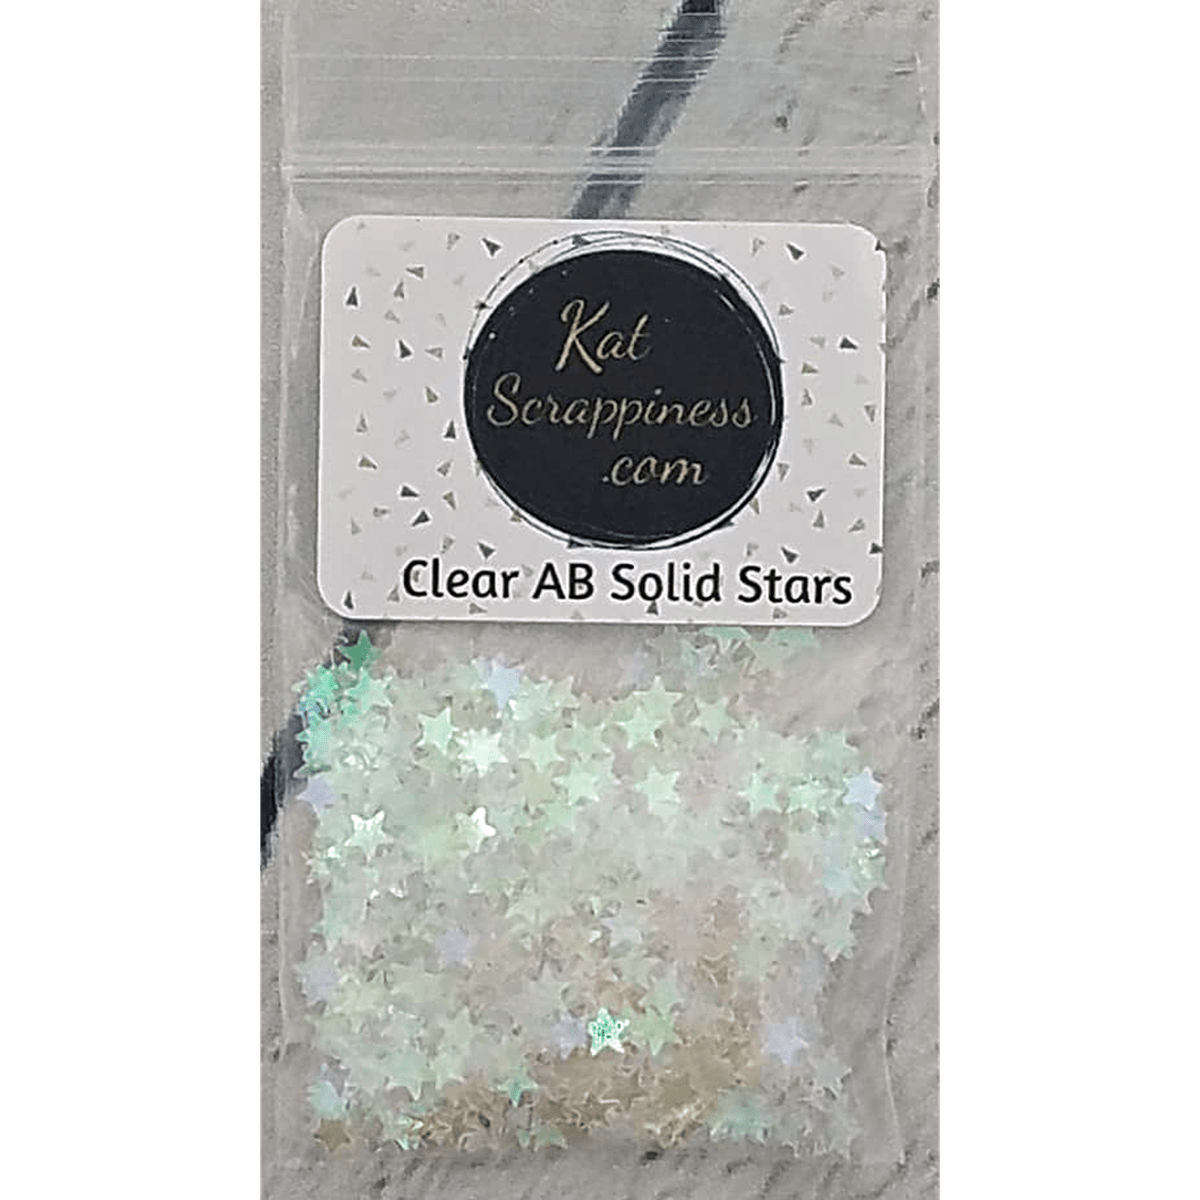 Clear AB Solid Star Confetti - Kat Scrappiness